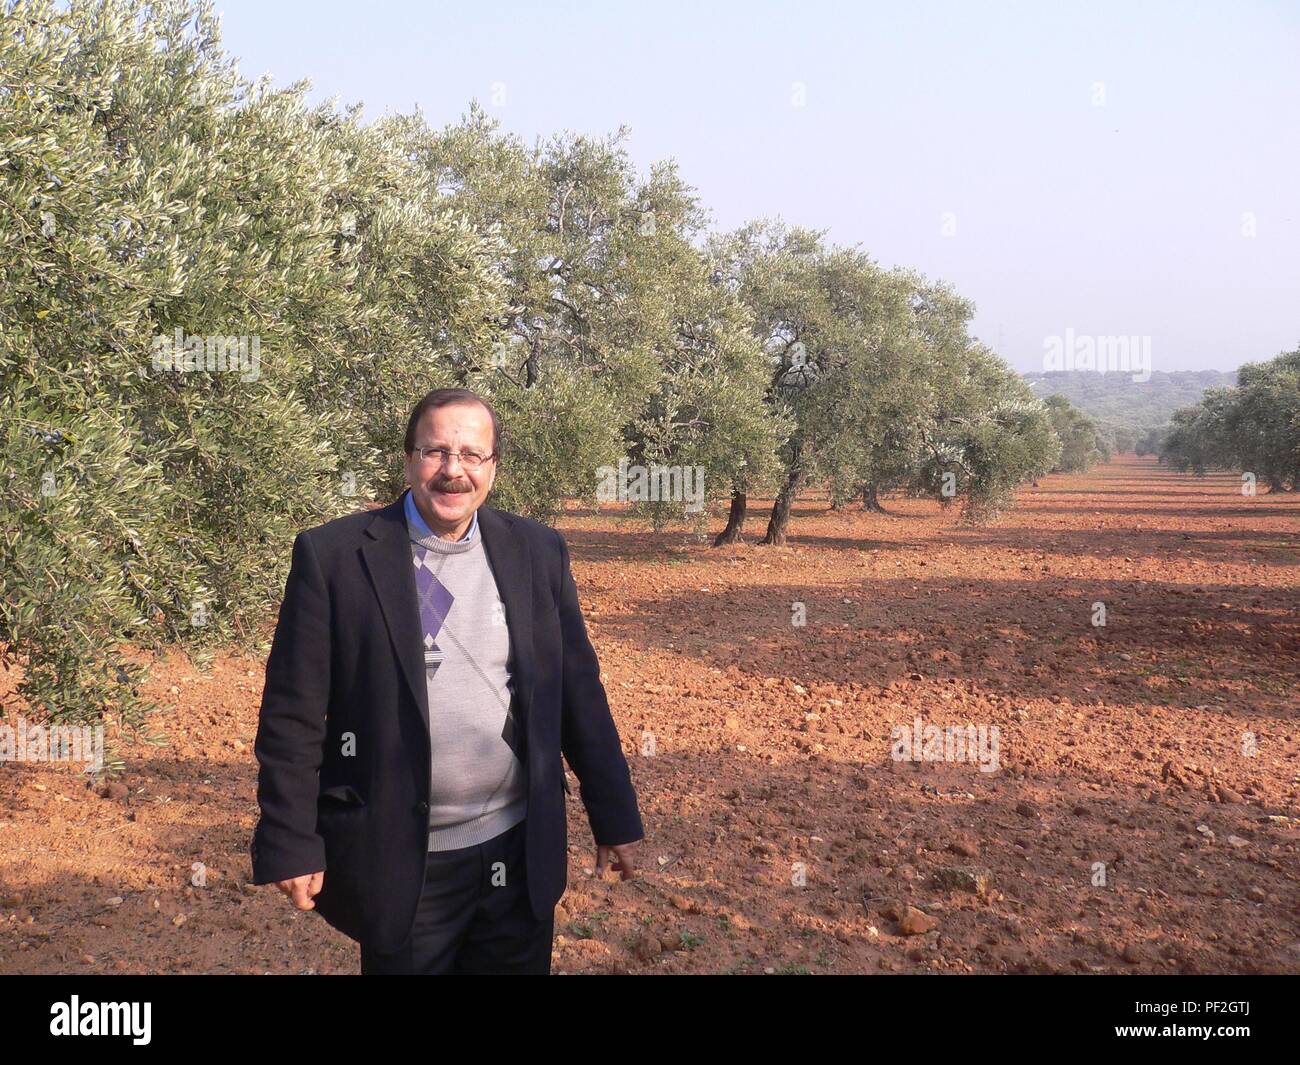 Date unknown - Syria: Undated photo of Syrian soap maker master Hassan  Harastani in an olive tree grove in Syria. Picture provided on July 3, 2017  courtesy of Samir Constantini, the owner